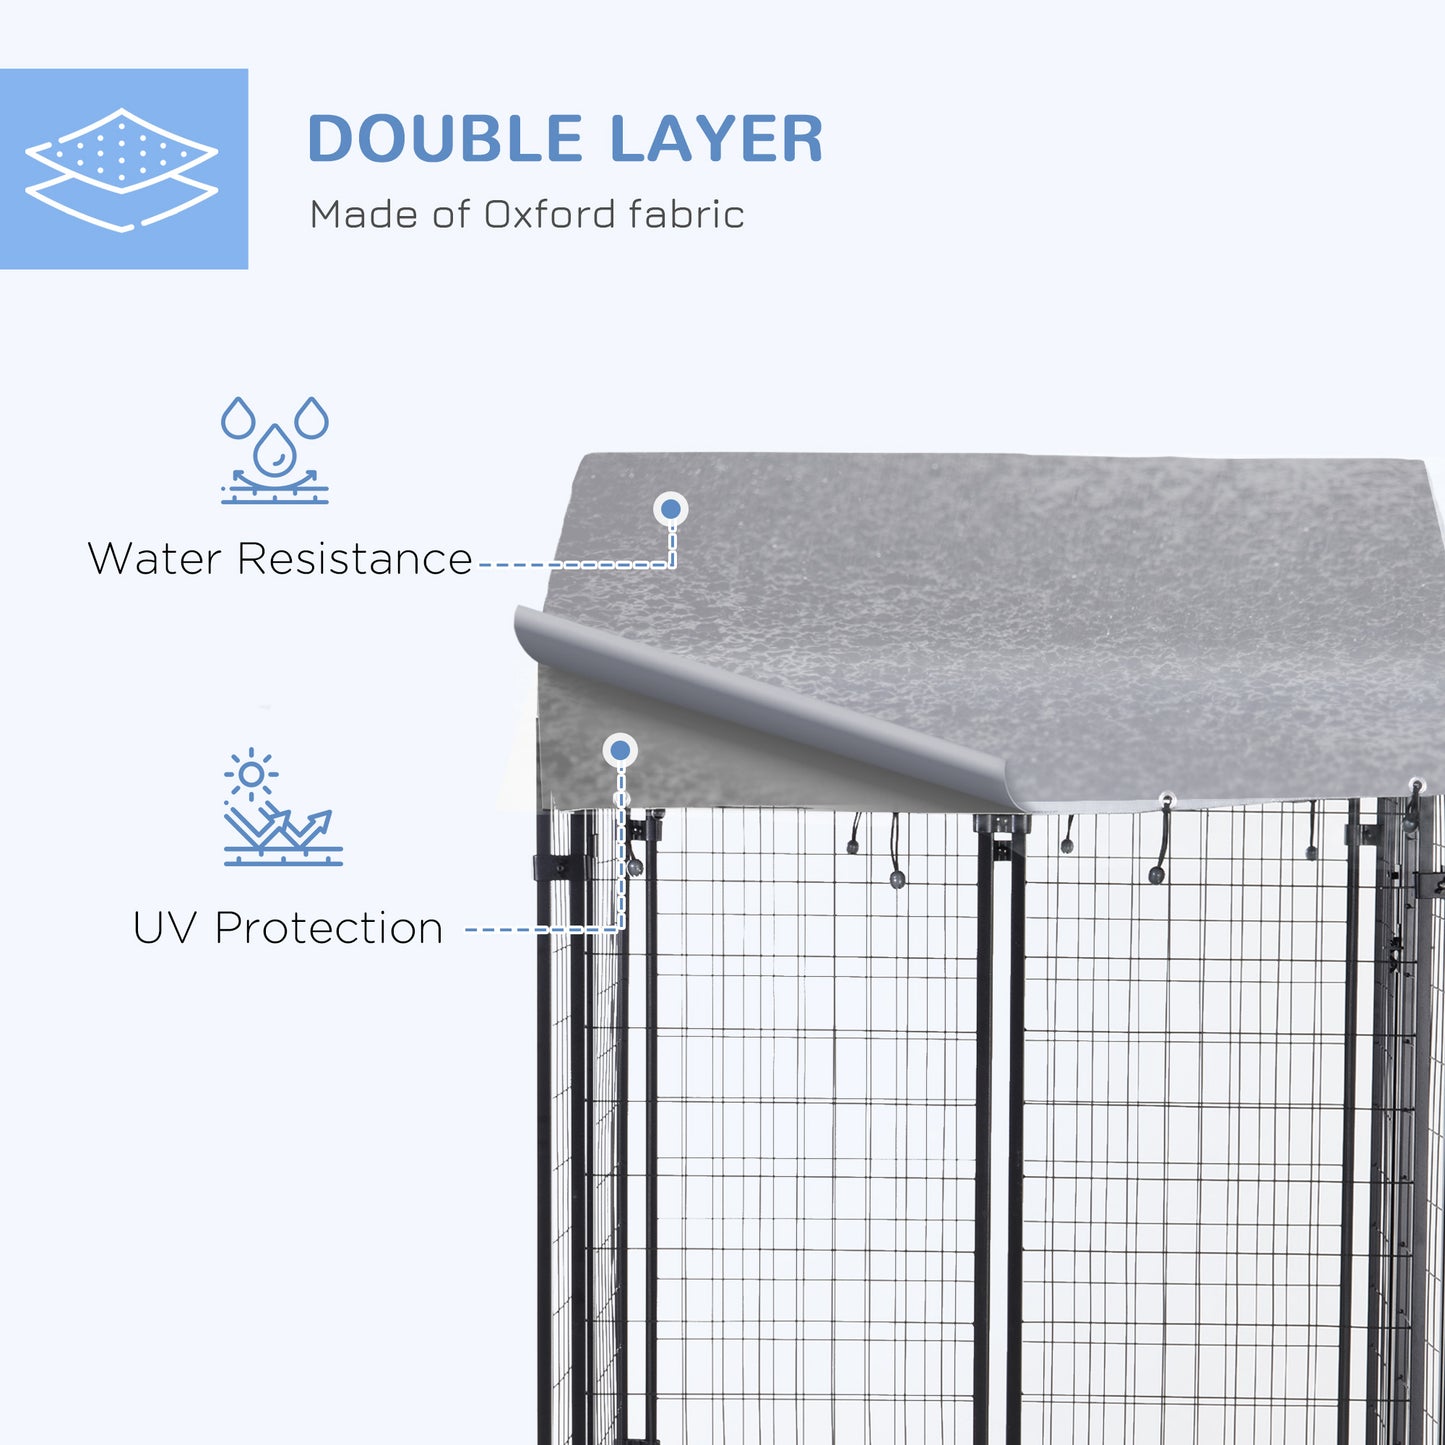 PawHut Outdoor Dog Kennel, Dog Run with UV-Resistant Canopy & Lockable Design, Metal Playpen Fence for Small and Medium Dogs, 120 x 120 x 138 cm